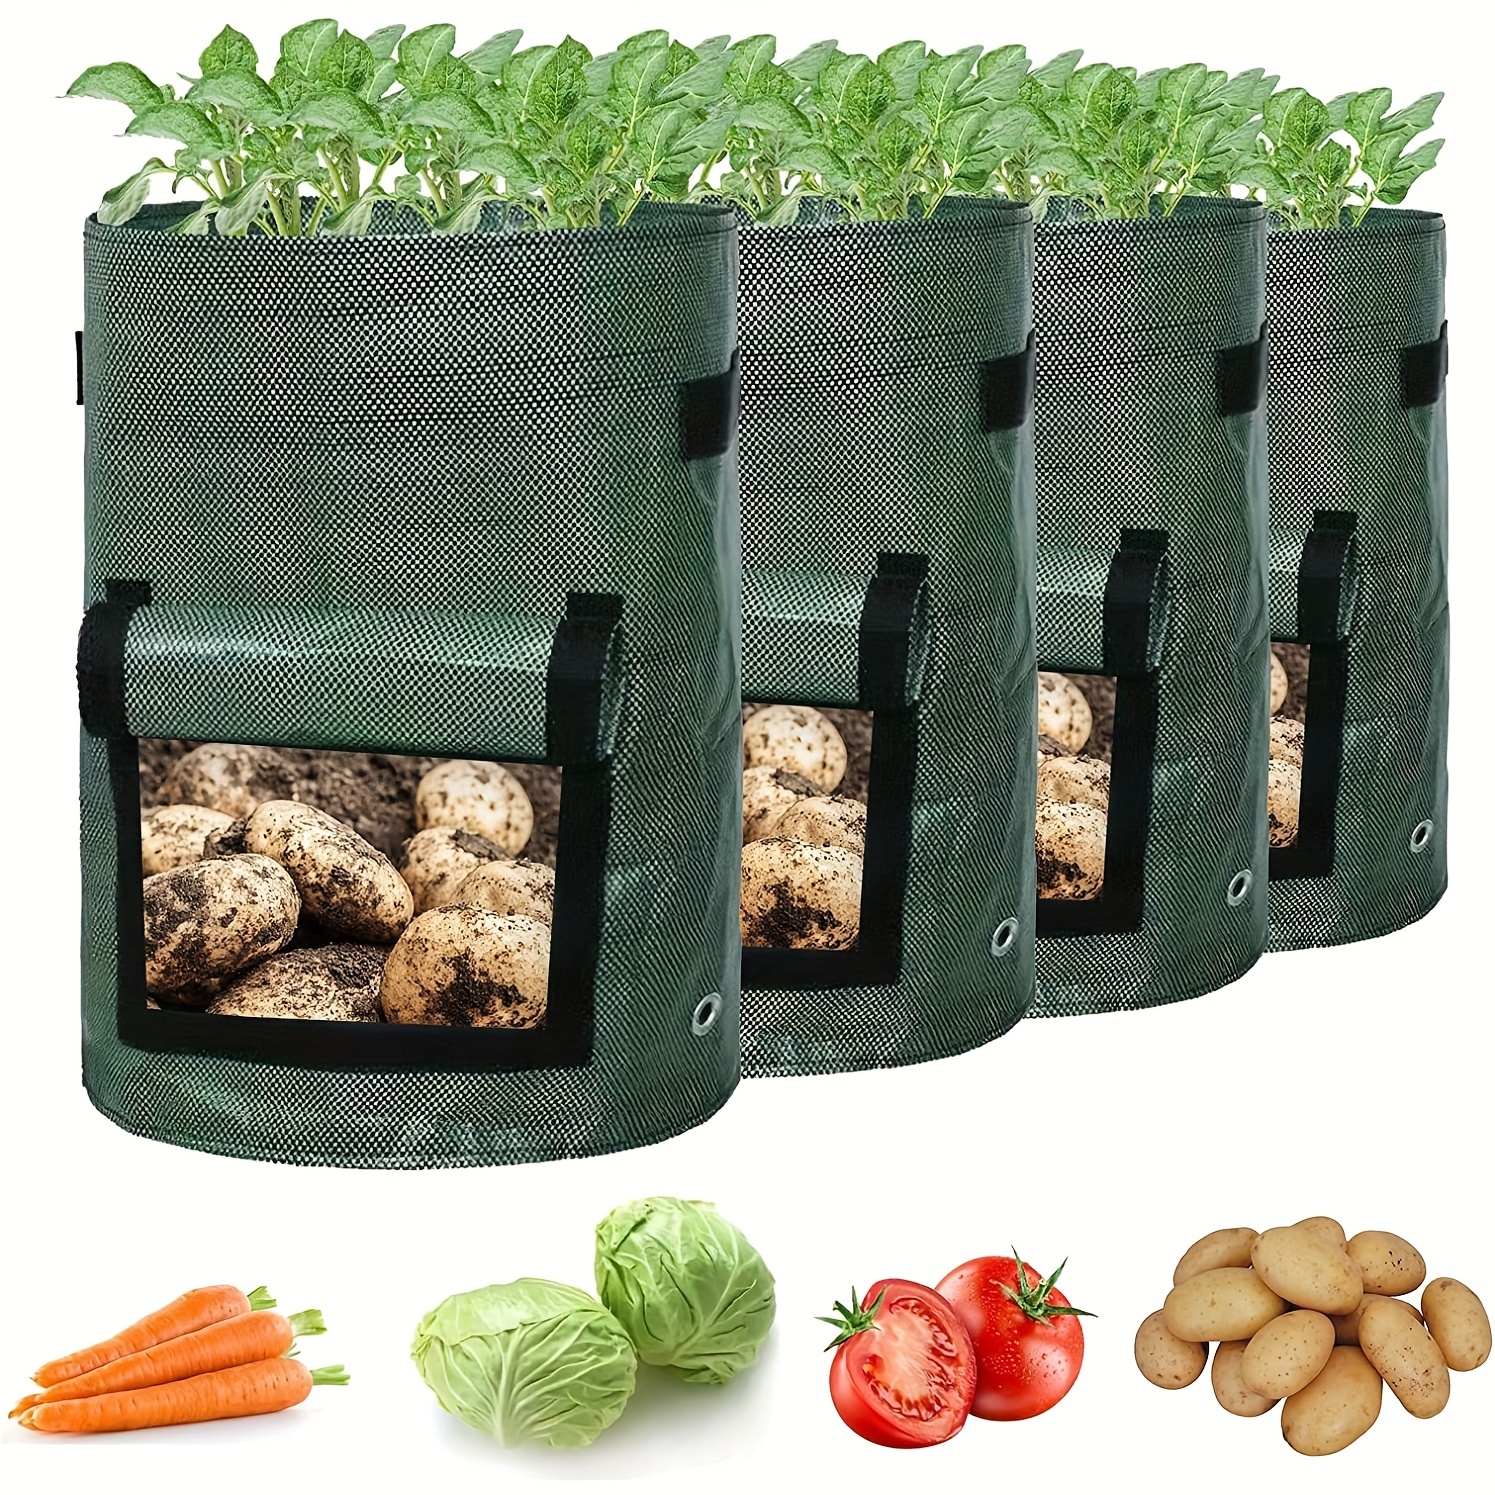 Futone Grow Bags, Potato Planter Bags, Planting Fabric Pots with Handles  and Flap, Garden Bags for Vegetables, Tomatoes, Carrots, Onions (10 Gallon)